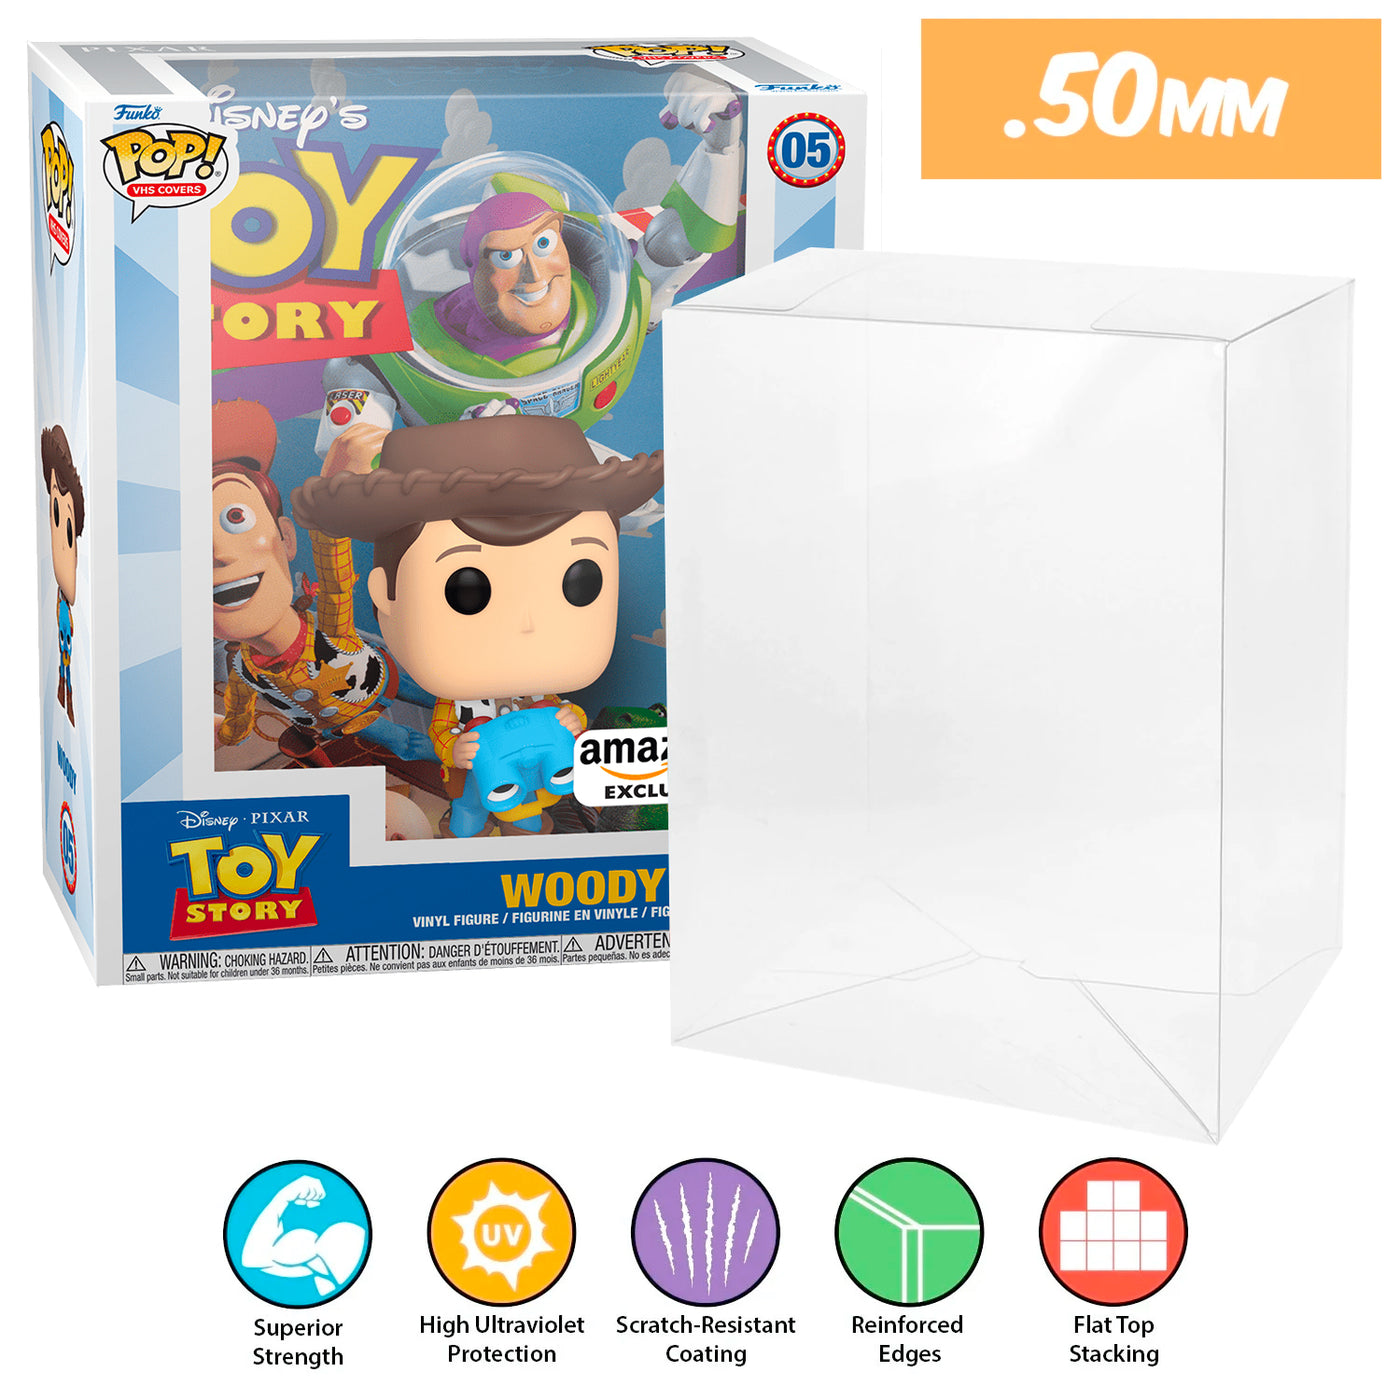 05 woody toy story amazon pop vhs covers best funko pop protectors thick strong uv scratch flat top stack vinyl display geek plastic shield vaulted eco armor fits collect protect display case kollector protector